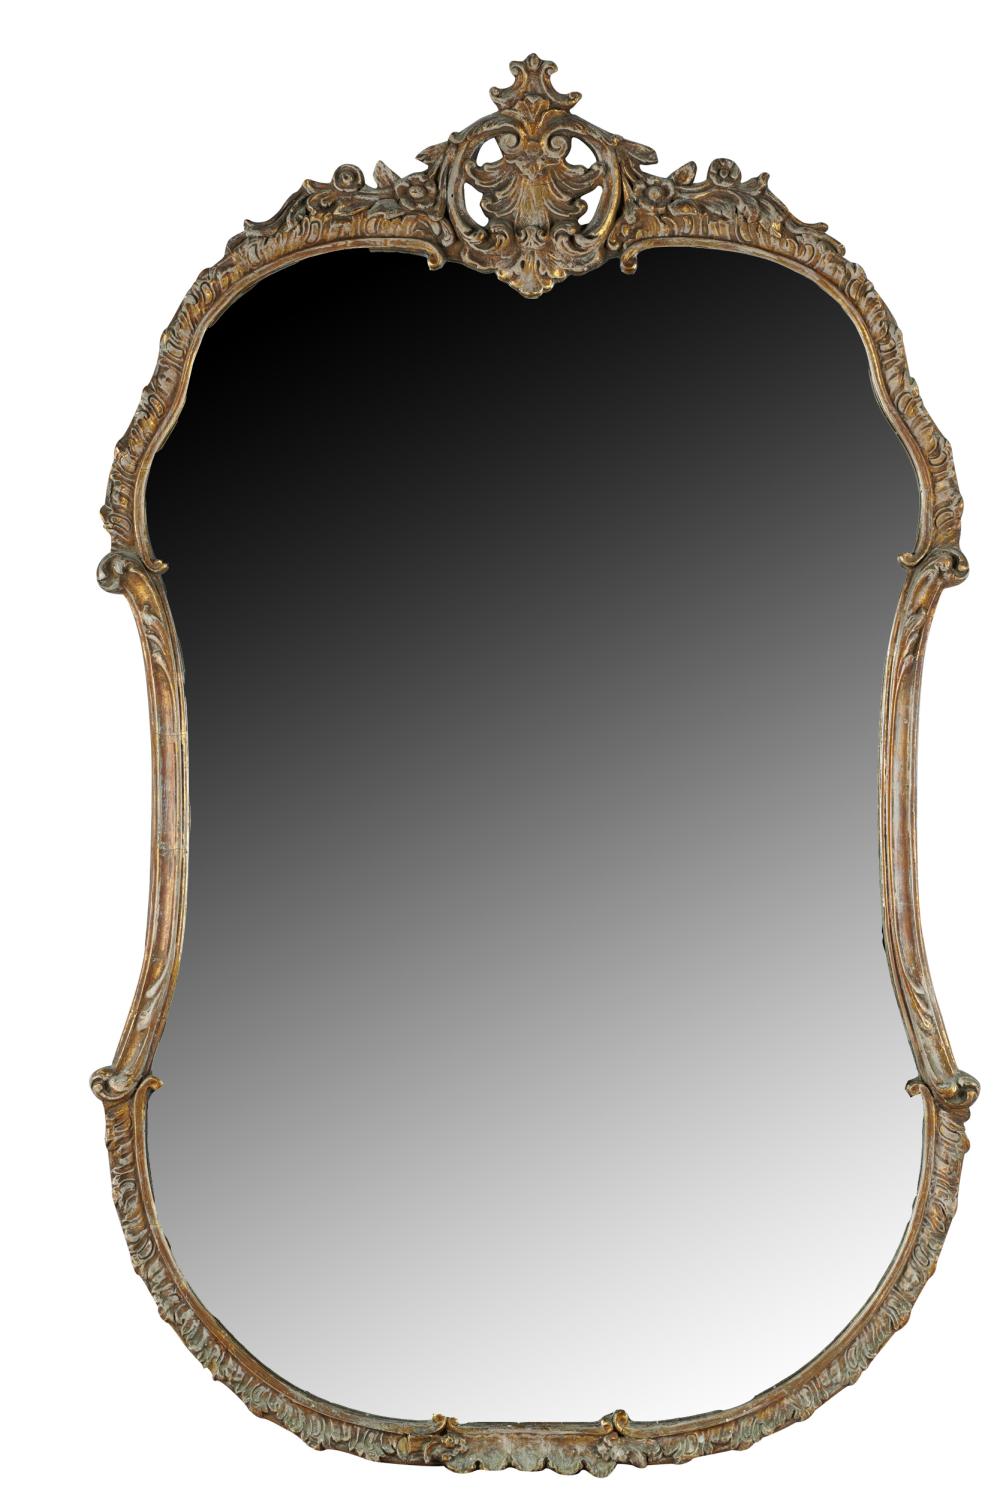 GILTWOOD CARTOUCHE MIRRORCondition: